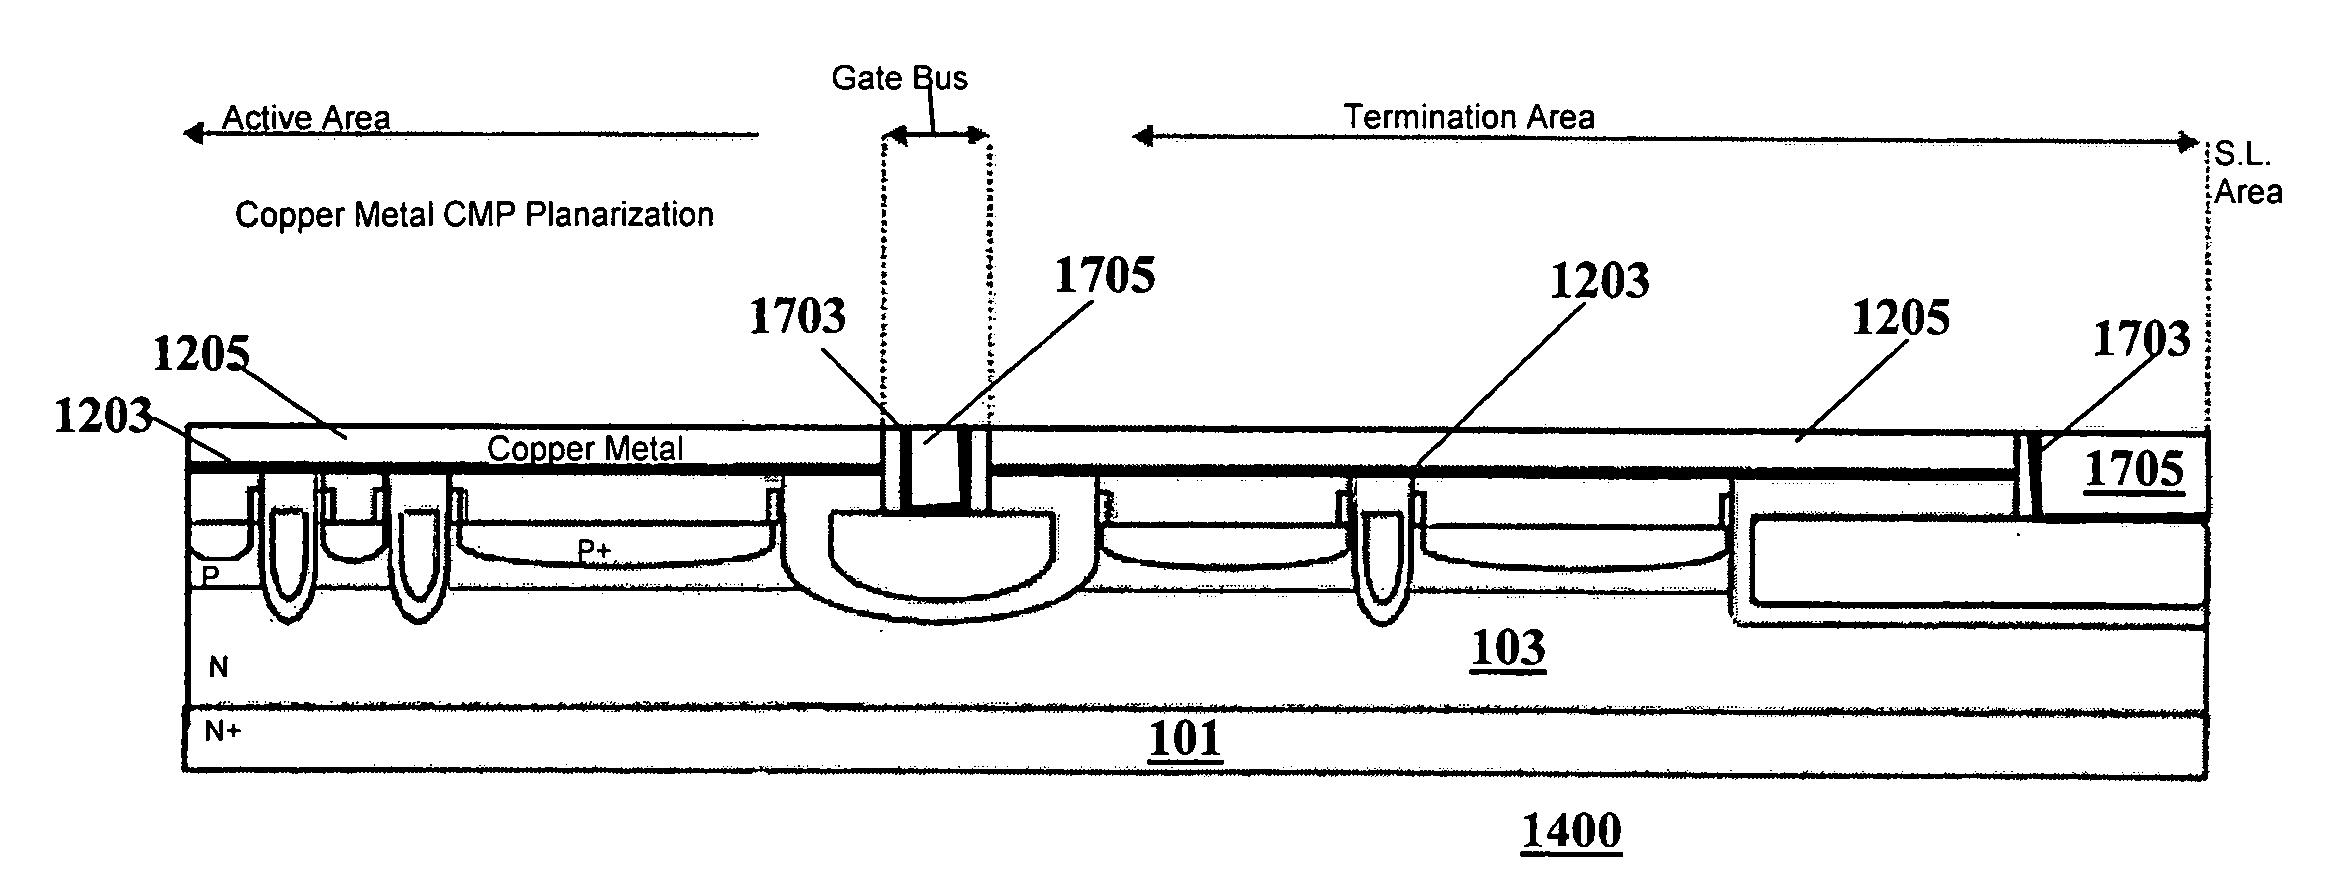 Trench mosfet and method of manufacture utilizing four masks